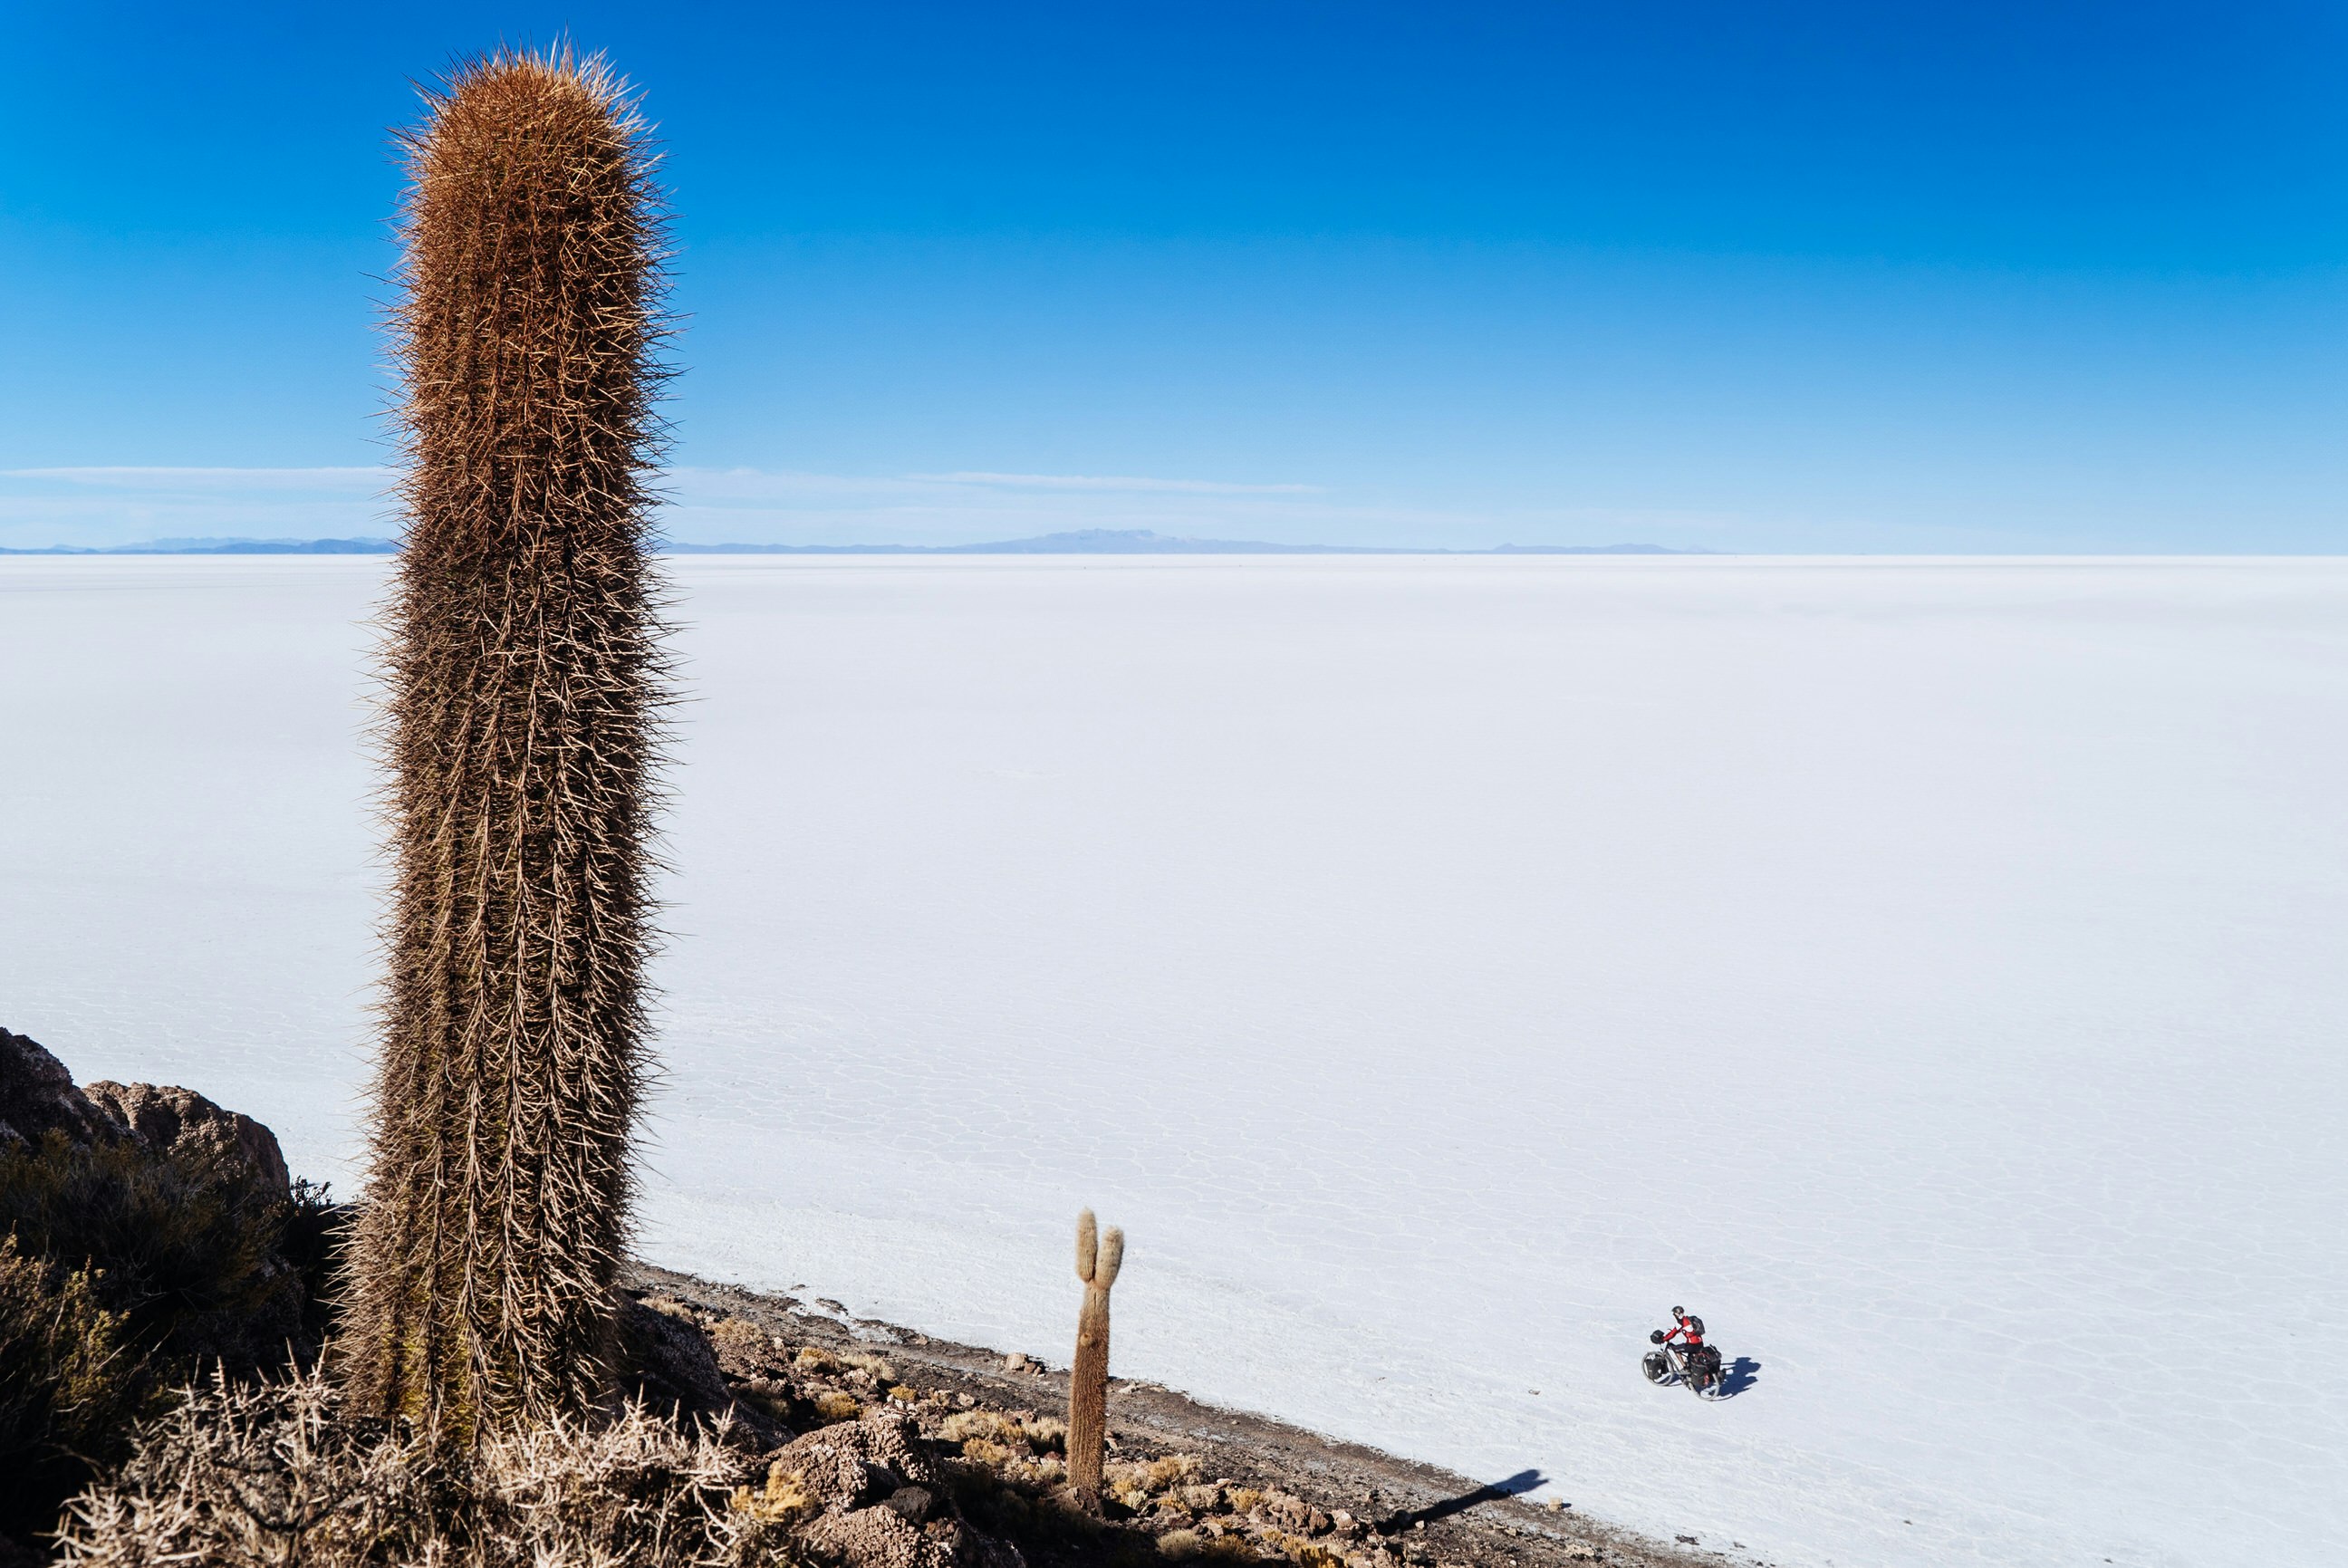 A tall cactus on a rocky slope stand in the foreground, while the flat and brilliantly white salt flats expand to the horizon; a lone cyclist rides on the salt